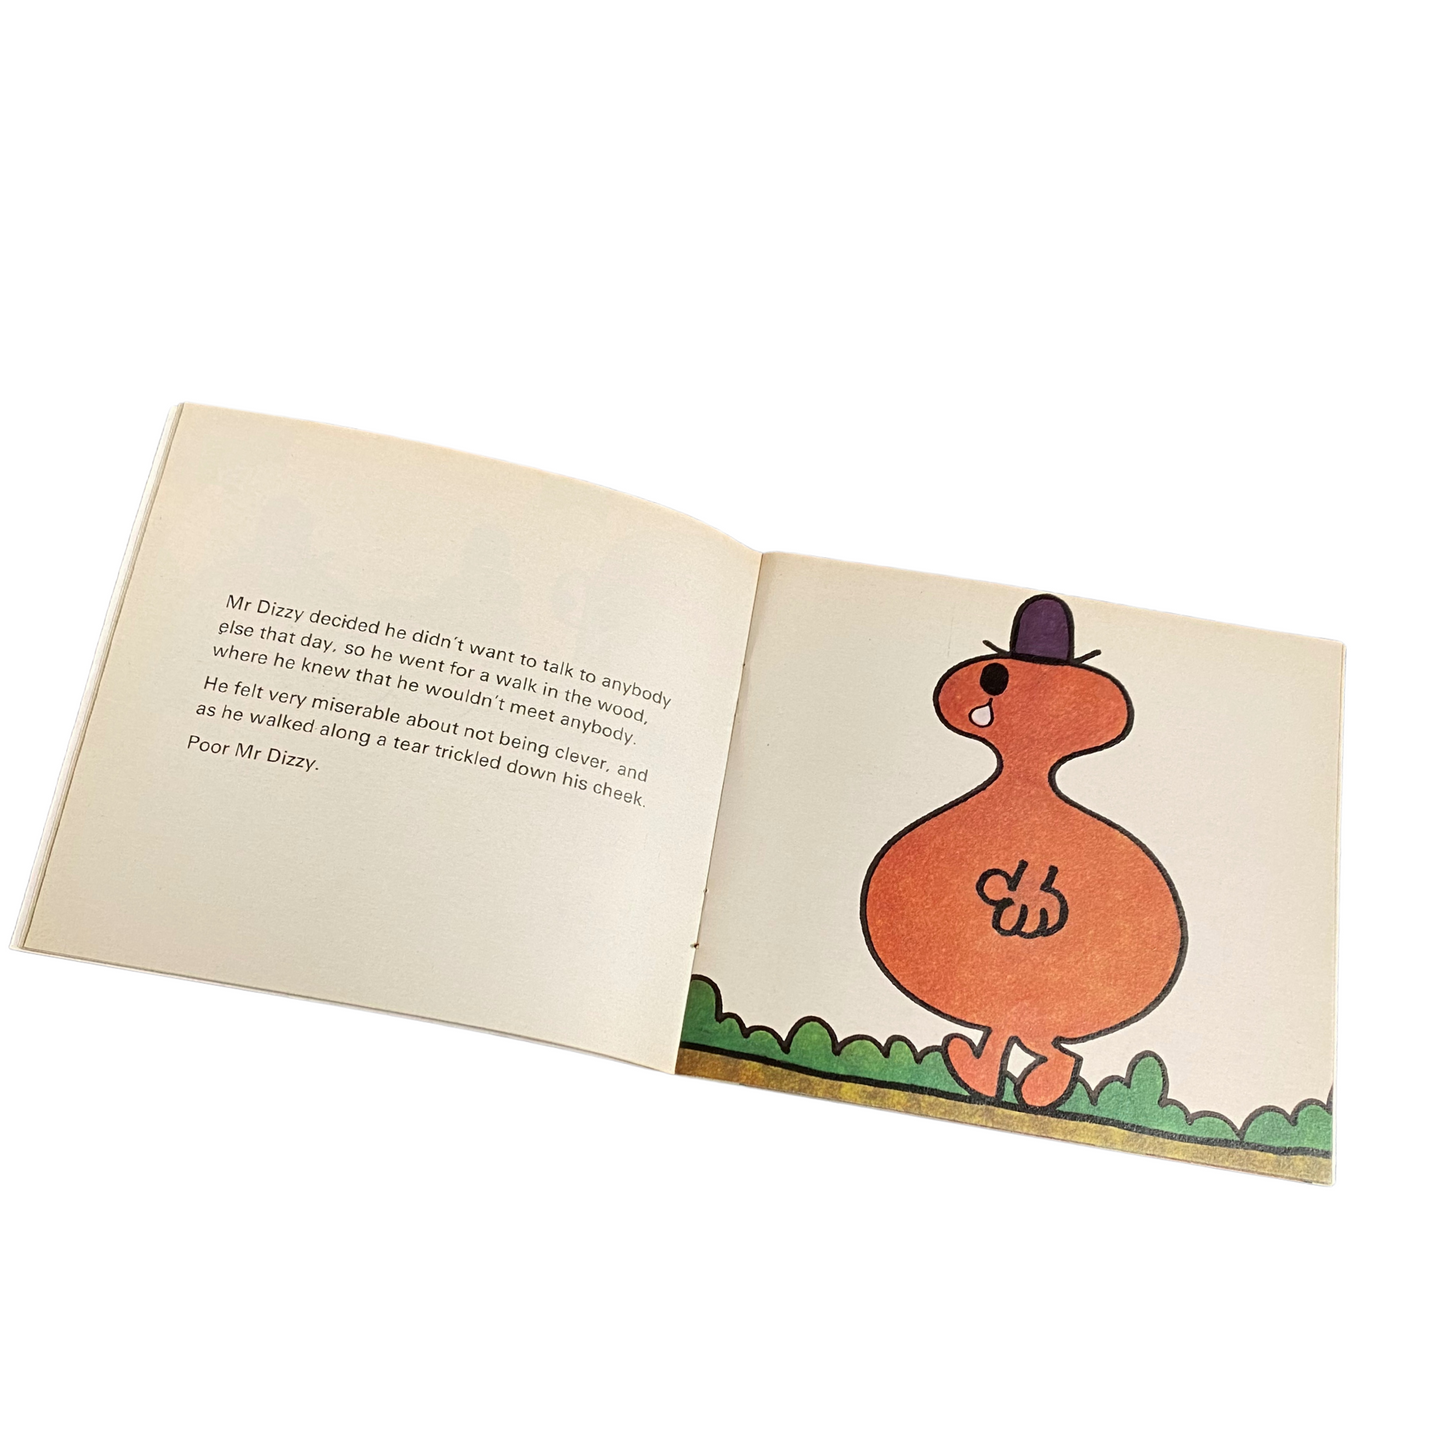 Retro Mr. Men Book -   Mr Dizzy      - 1976  Edition  by Roger Hargreaves